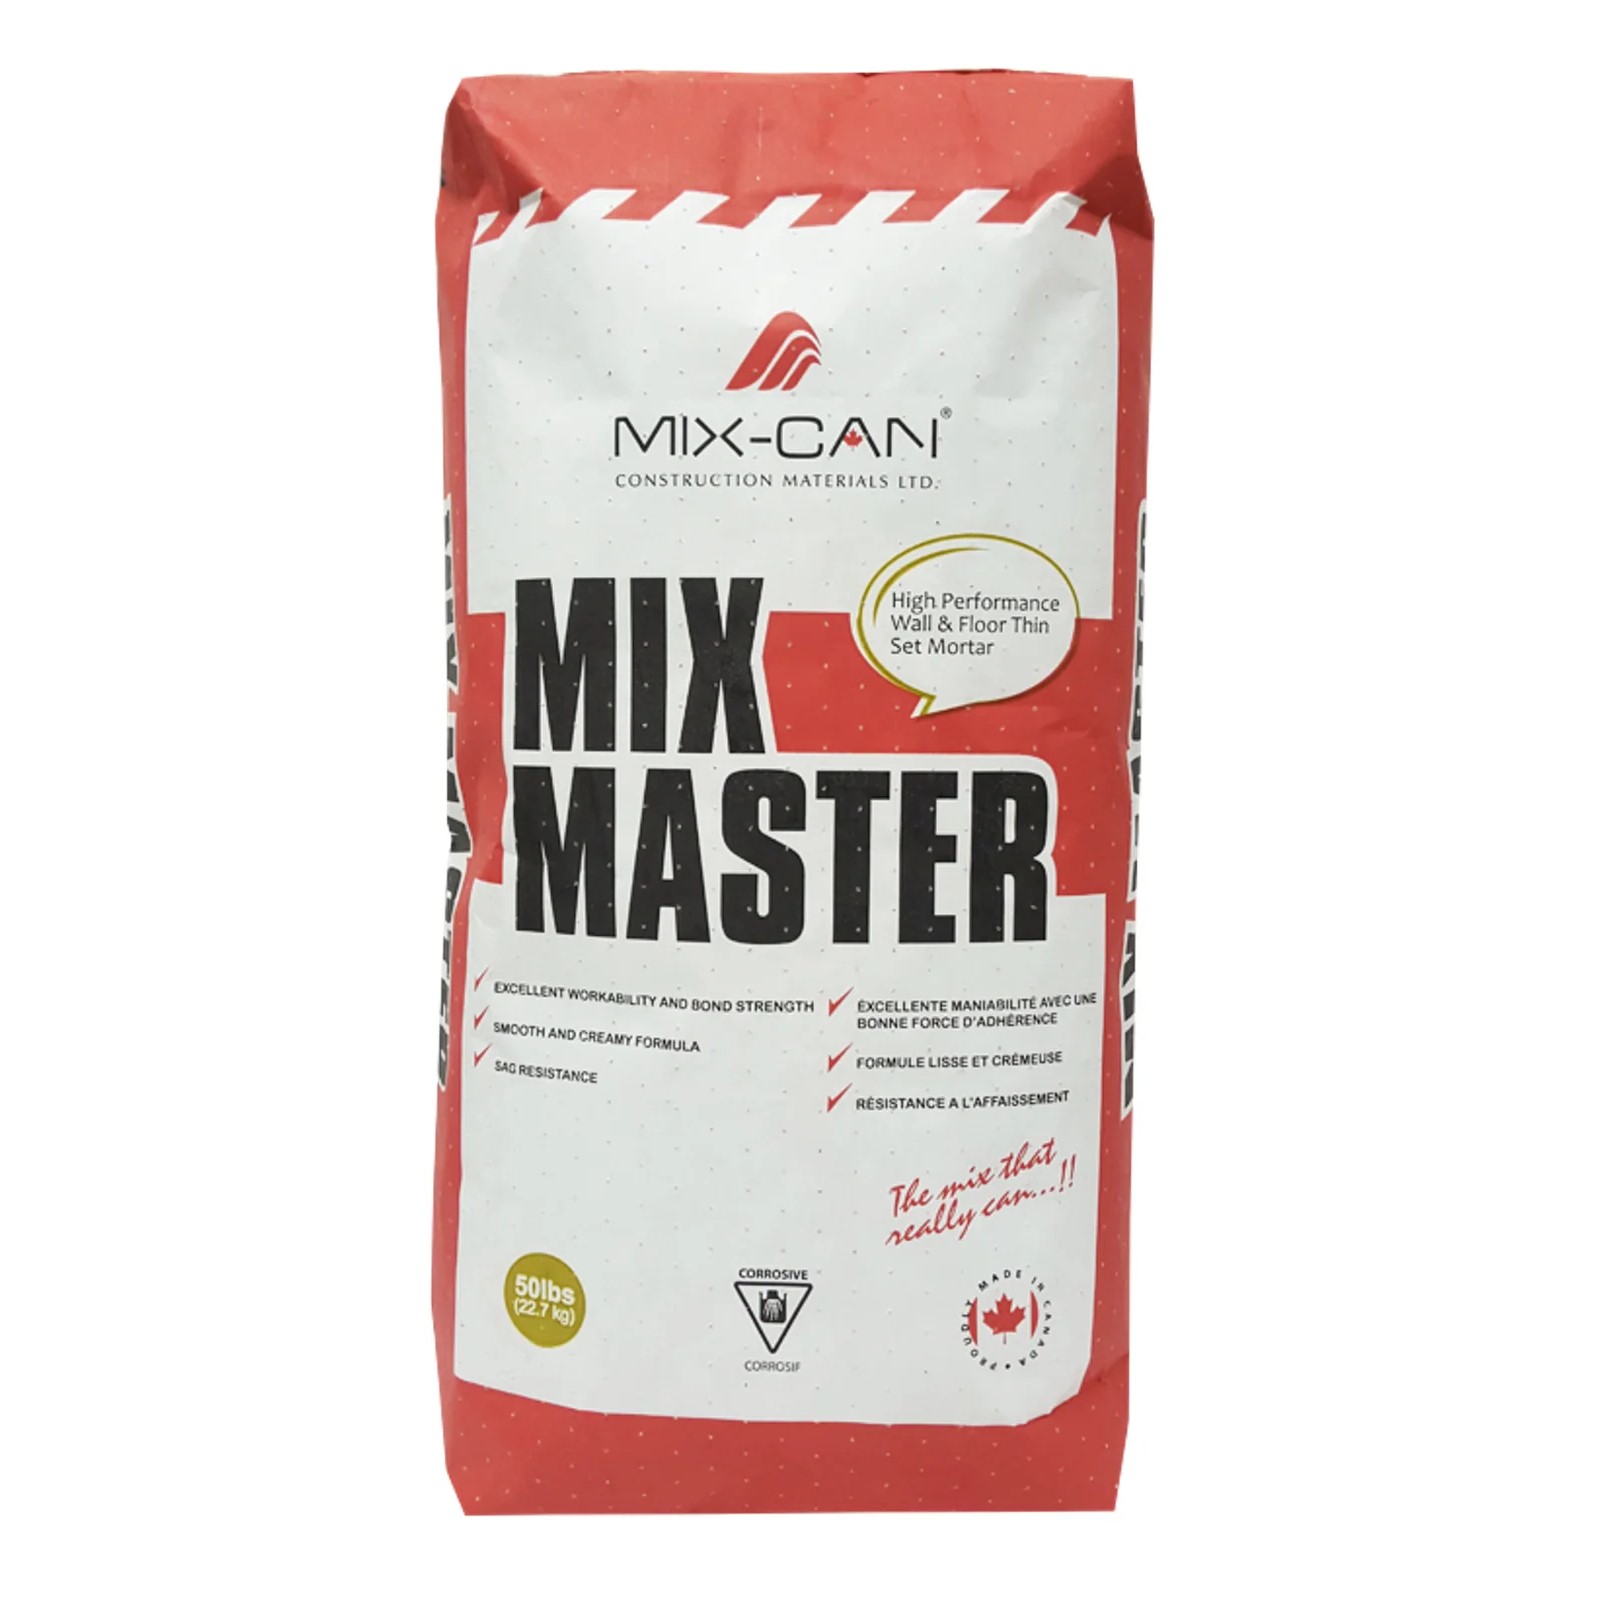 MIX CAN - MIXMASTER (Grey) - High Performance Uncoupling Mortar 50lbs (Red Bag)-60 BAGS/SKID